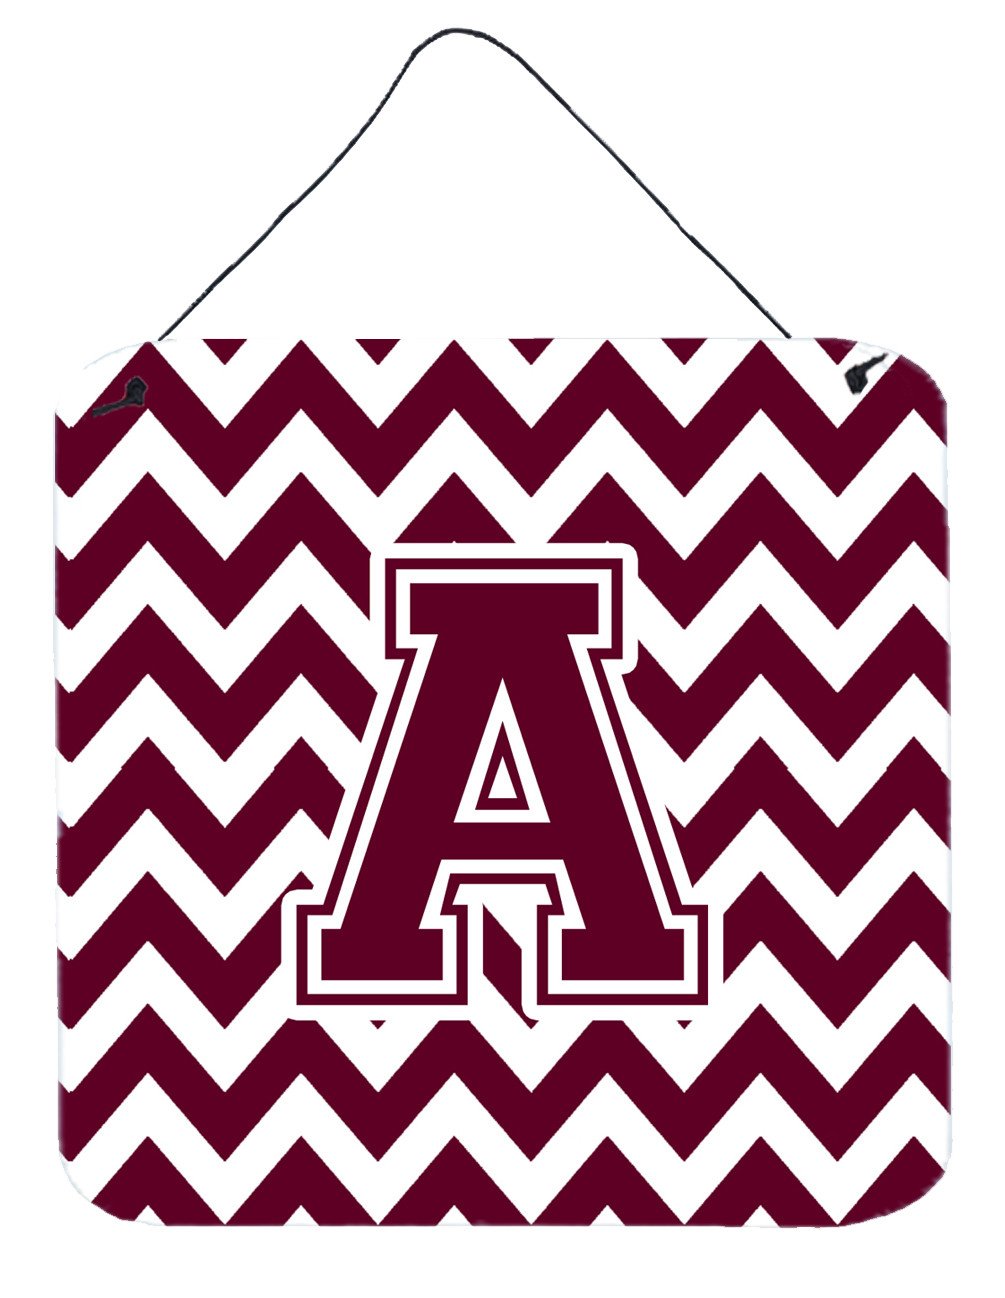 Letter A Chevron Maroon and White  Wall or Door Hanging Prints CJ1051-ADS66 by Caroline's Treasures